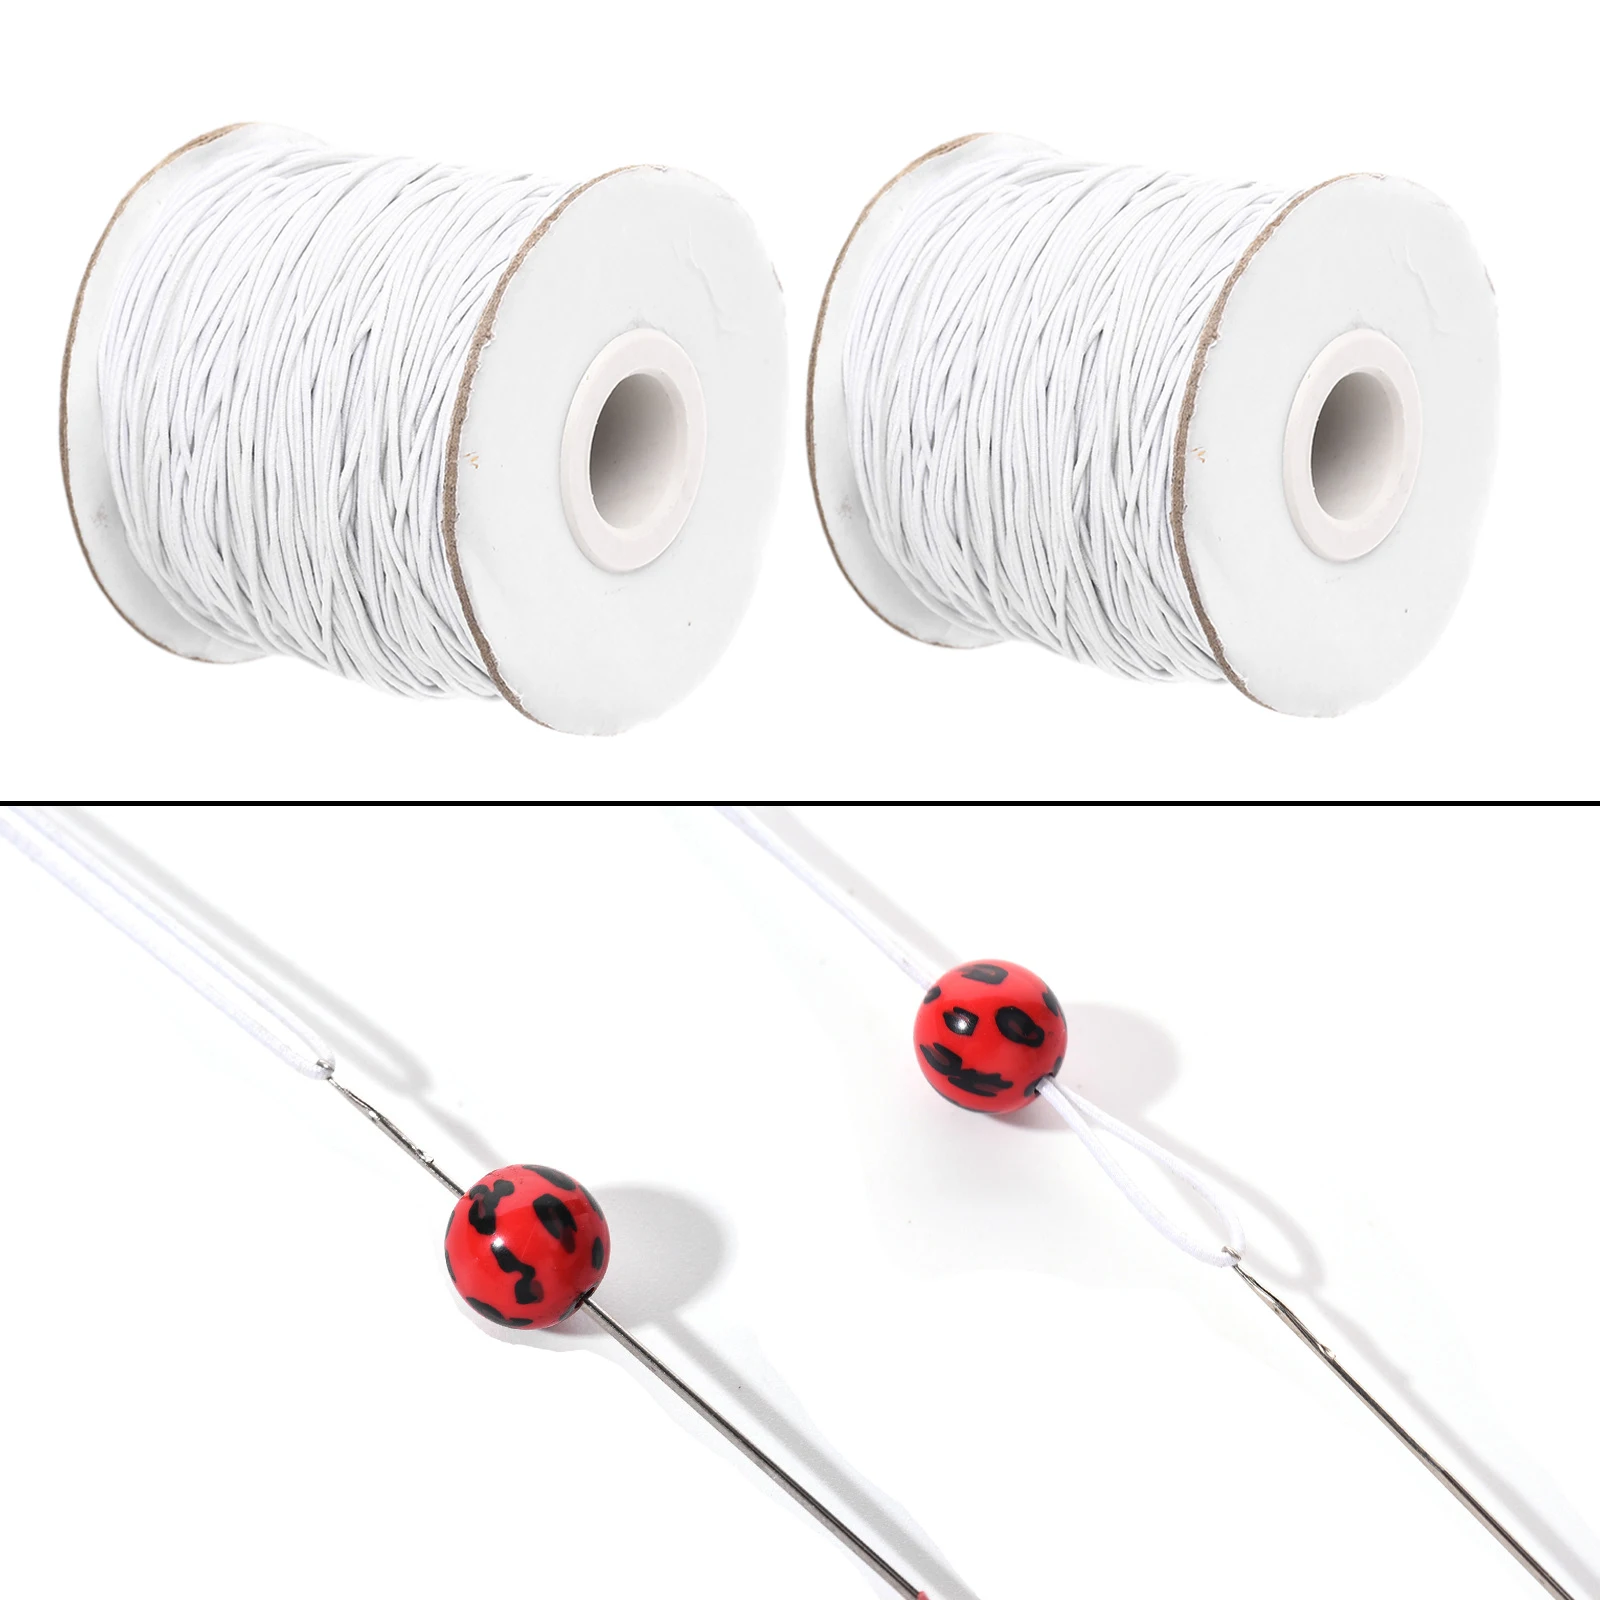 100m Elastic Jewelry Cord Beading String Strong Stretchy Thread Cords For Knitting DIY Crafts Jewelry Making Bracelets